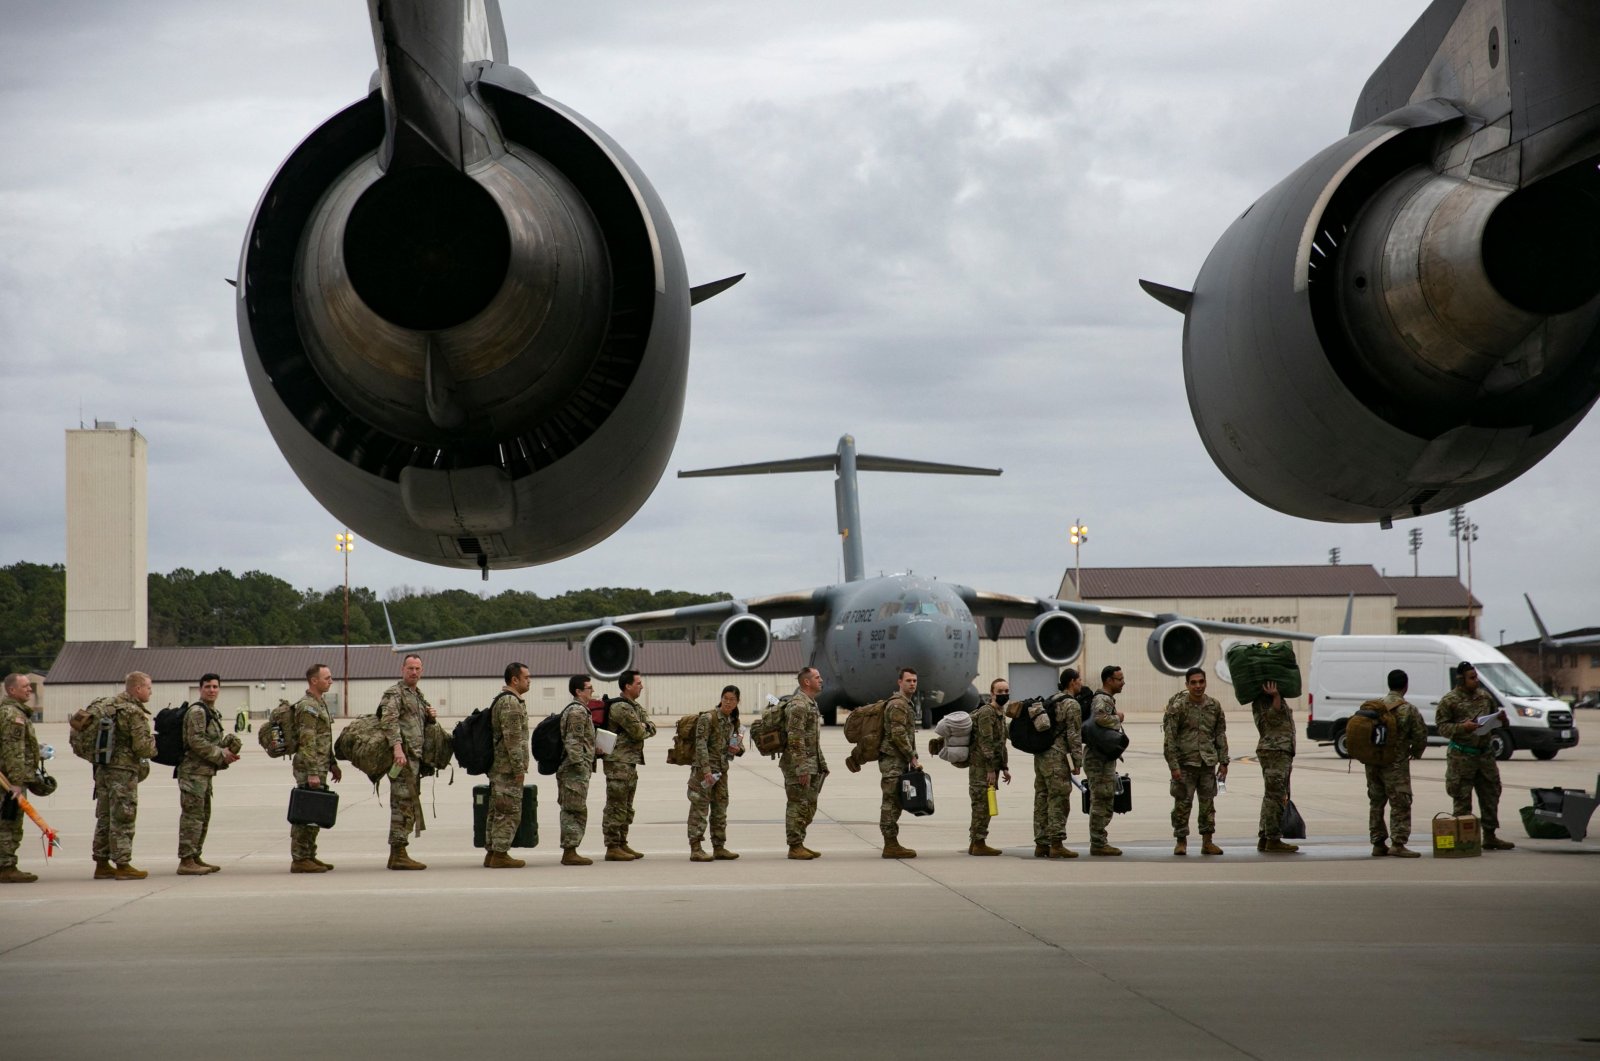 U.S. troops deploy for Europe from Pope Army Airfield at Fort Bragg, North Carolina, U.S., Feb. 3, 2022. (AFP Photo)